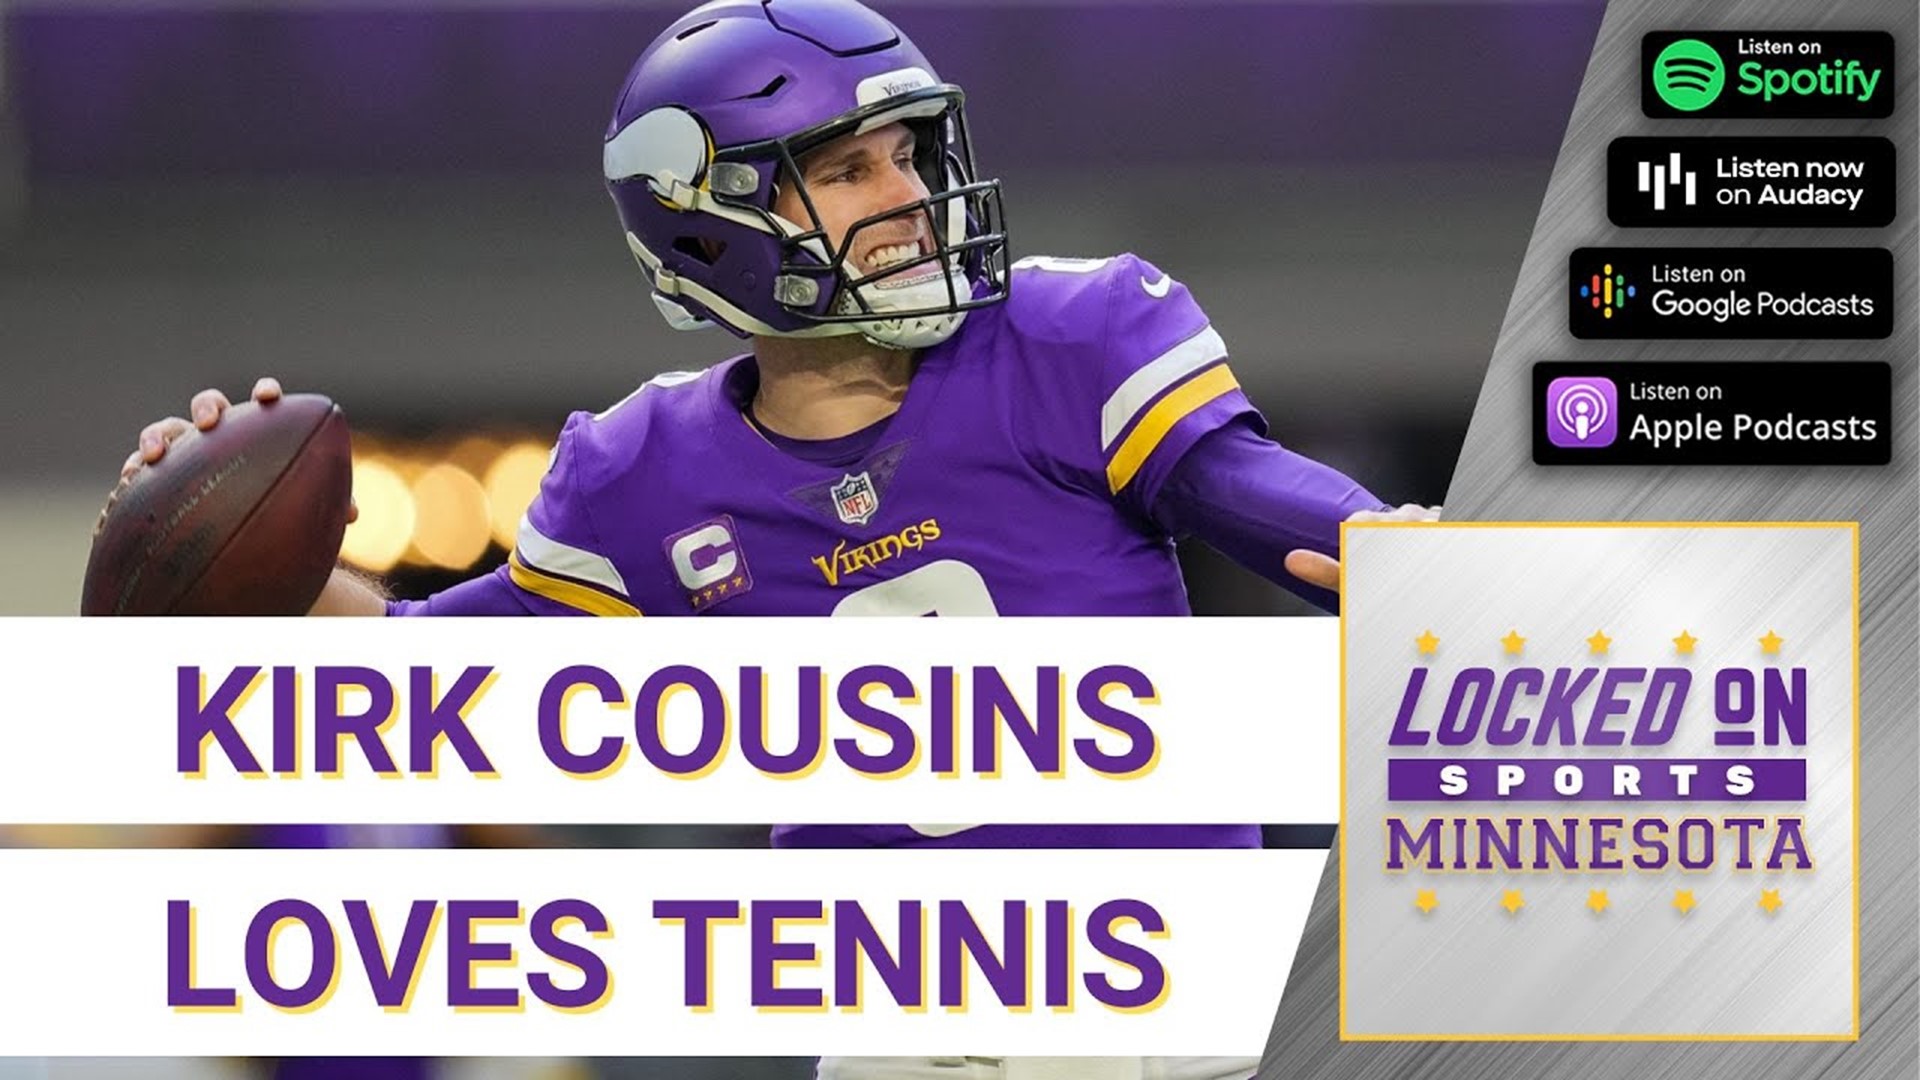 Minnesota Vikings QB Kirk Cousins elaborates on why he believes tennis is the best tool to help him in the offseason.